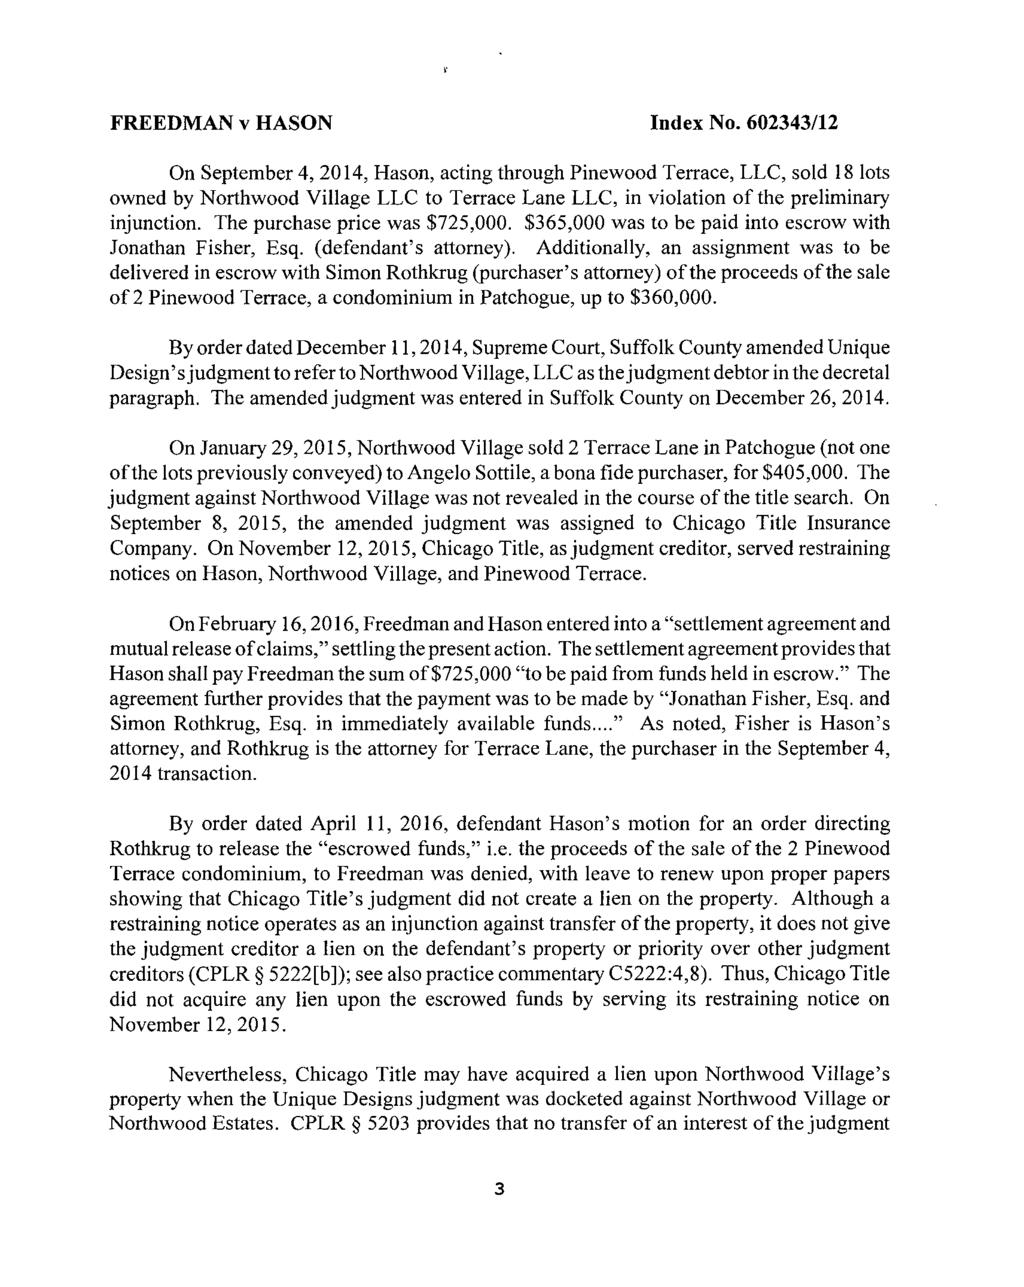 [* 3] On September 4, 2014, Hason, acting through Pinewood Terrace, LLC, sold 18 lots owned by Northwood Village LLC to Terrace Lane LLC, in violation of the preliminary injunction.